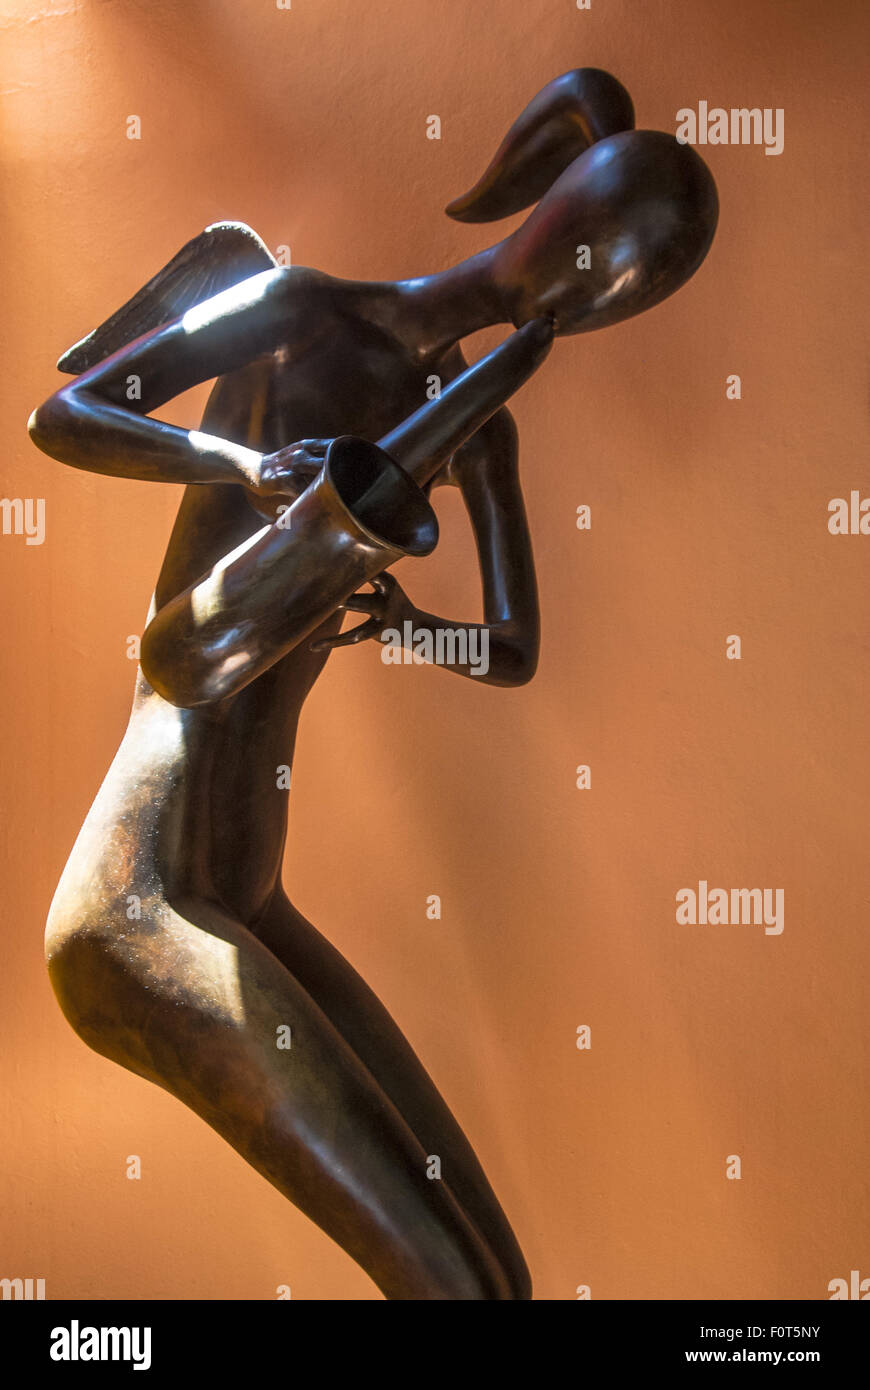 Sculpture of angelic woman playing a saxophone in the River Café,  Cuale River Island, Puerto Vallarta, Mexico Stock Photo